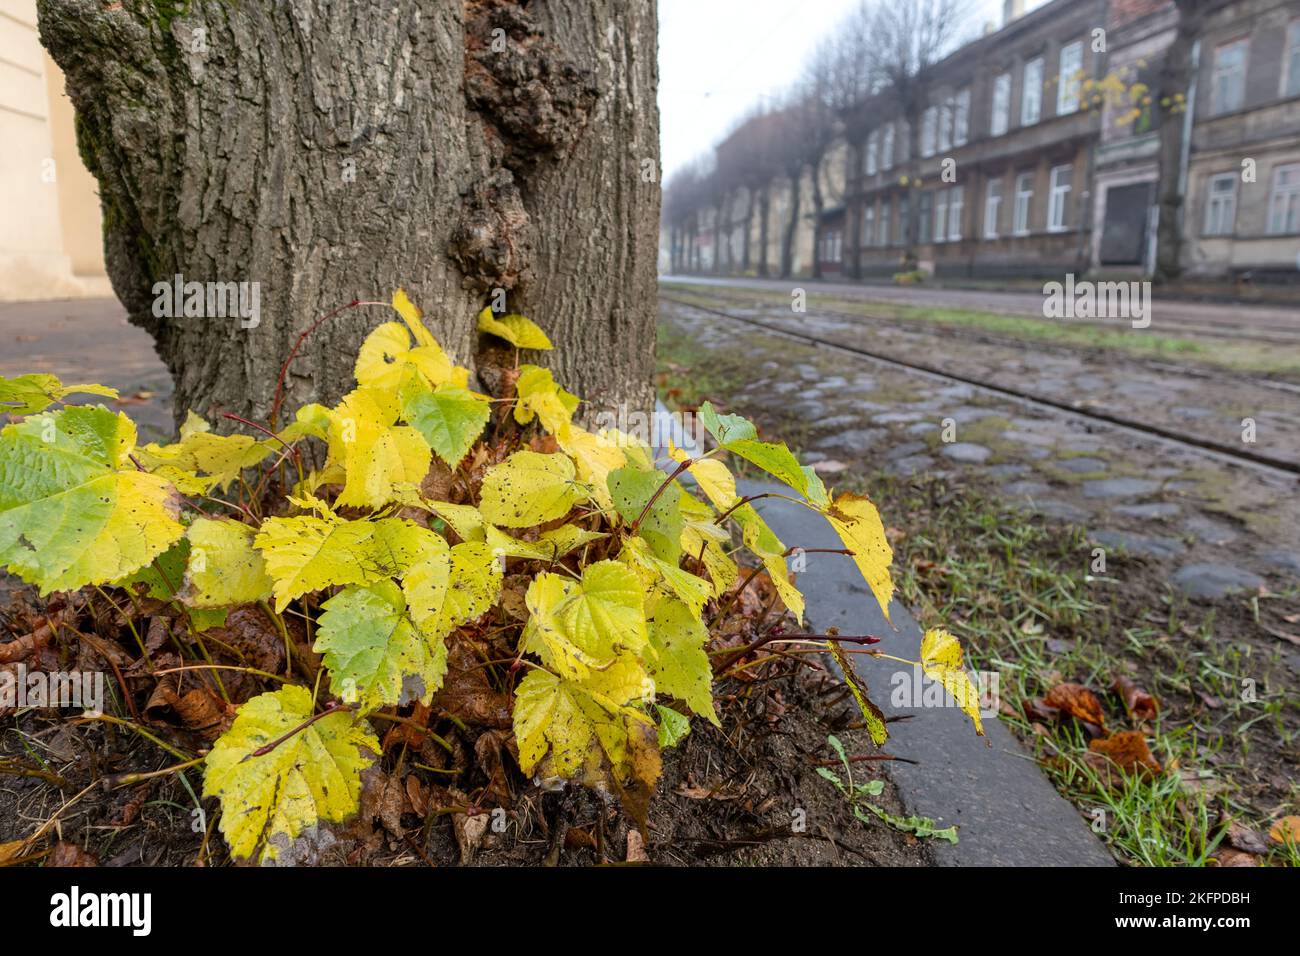 Yellow green tree leaves in autumn with railway tracks in the background Stock Photo